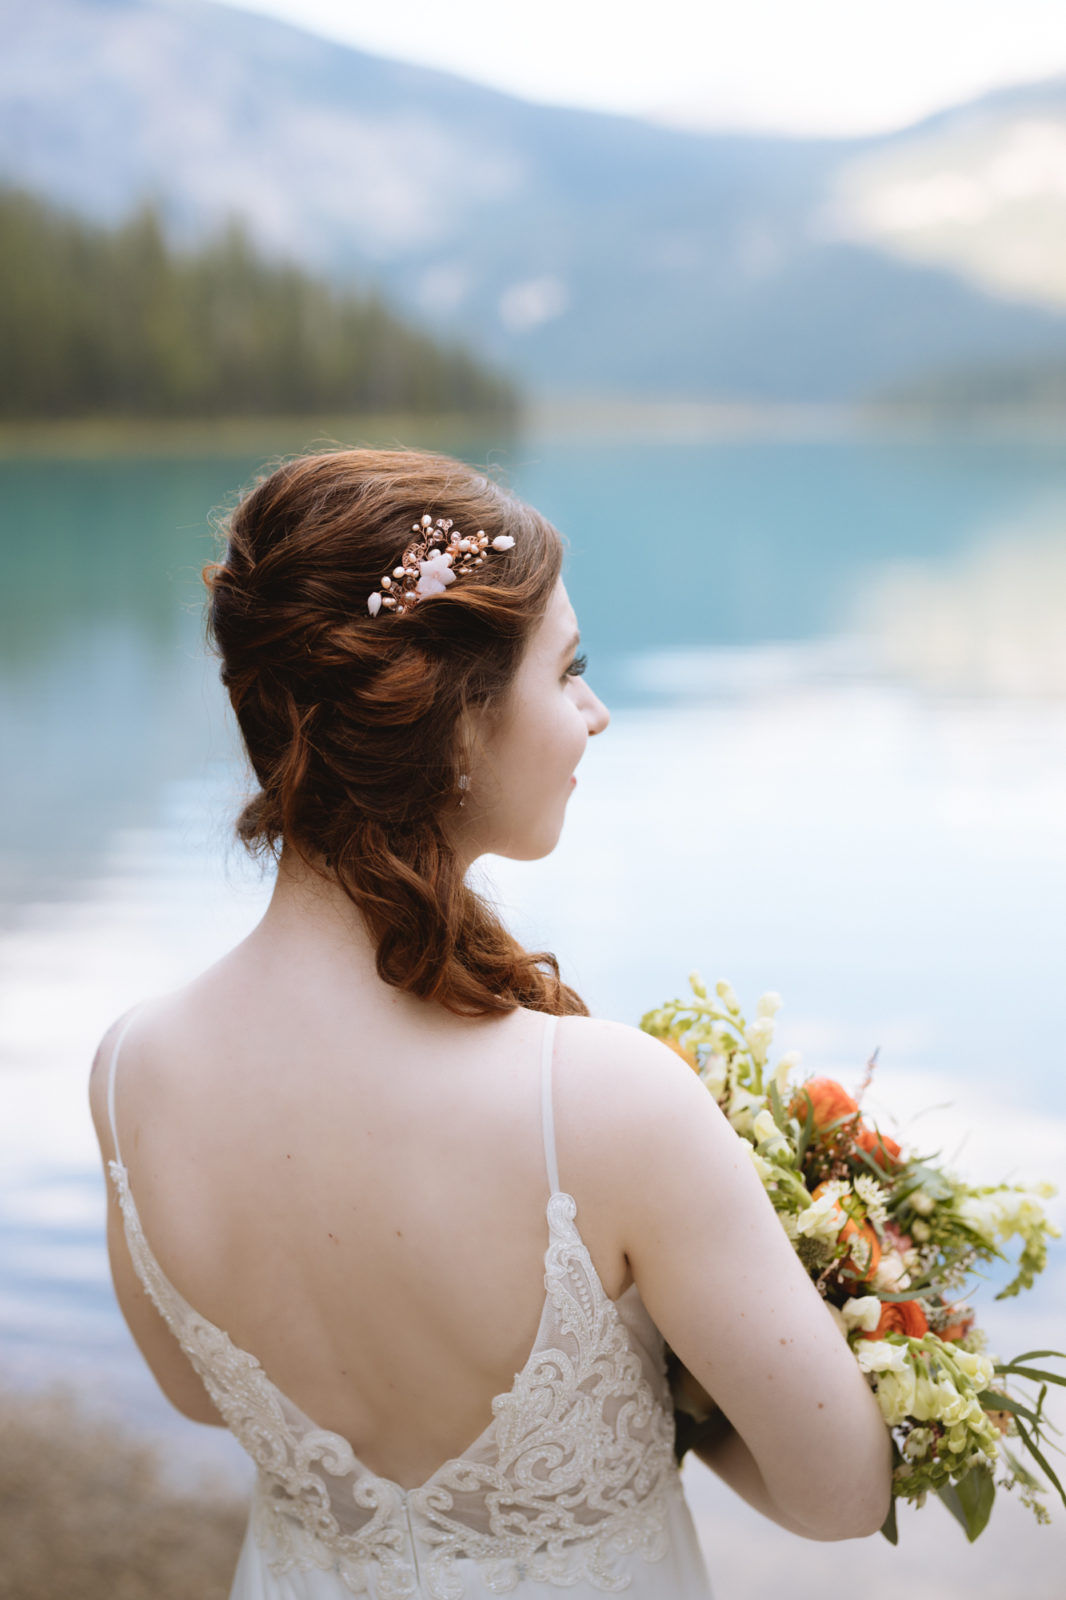 A bride wearing a delicate bridal accessory in her hair stands next to Emerald Lake for her Elopement in Yoho National Park